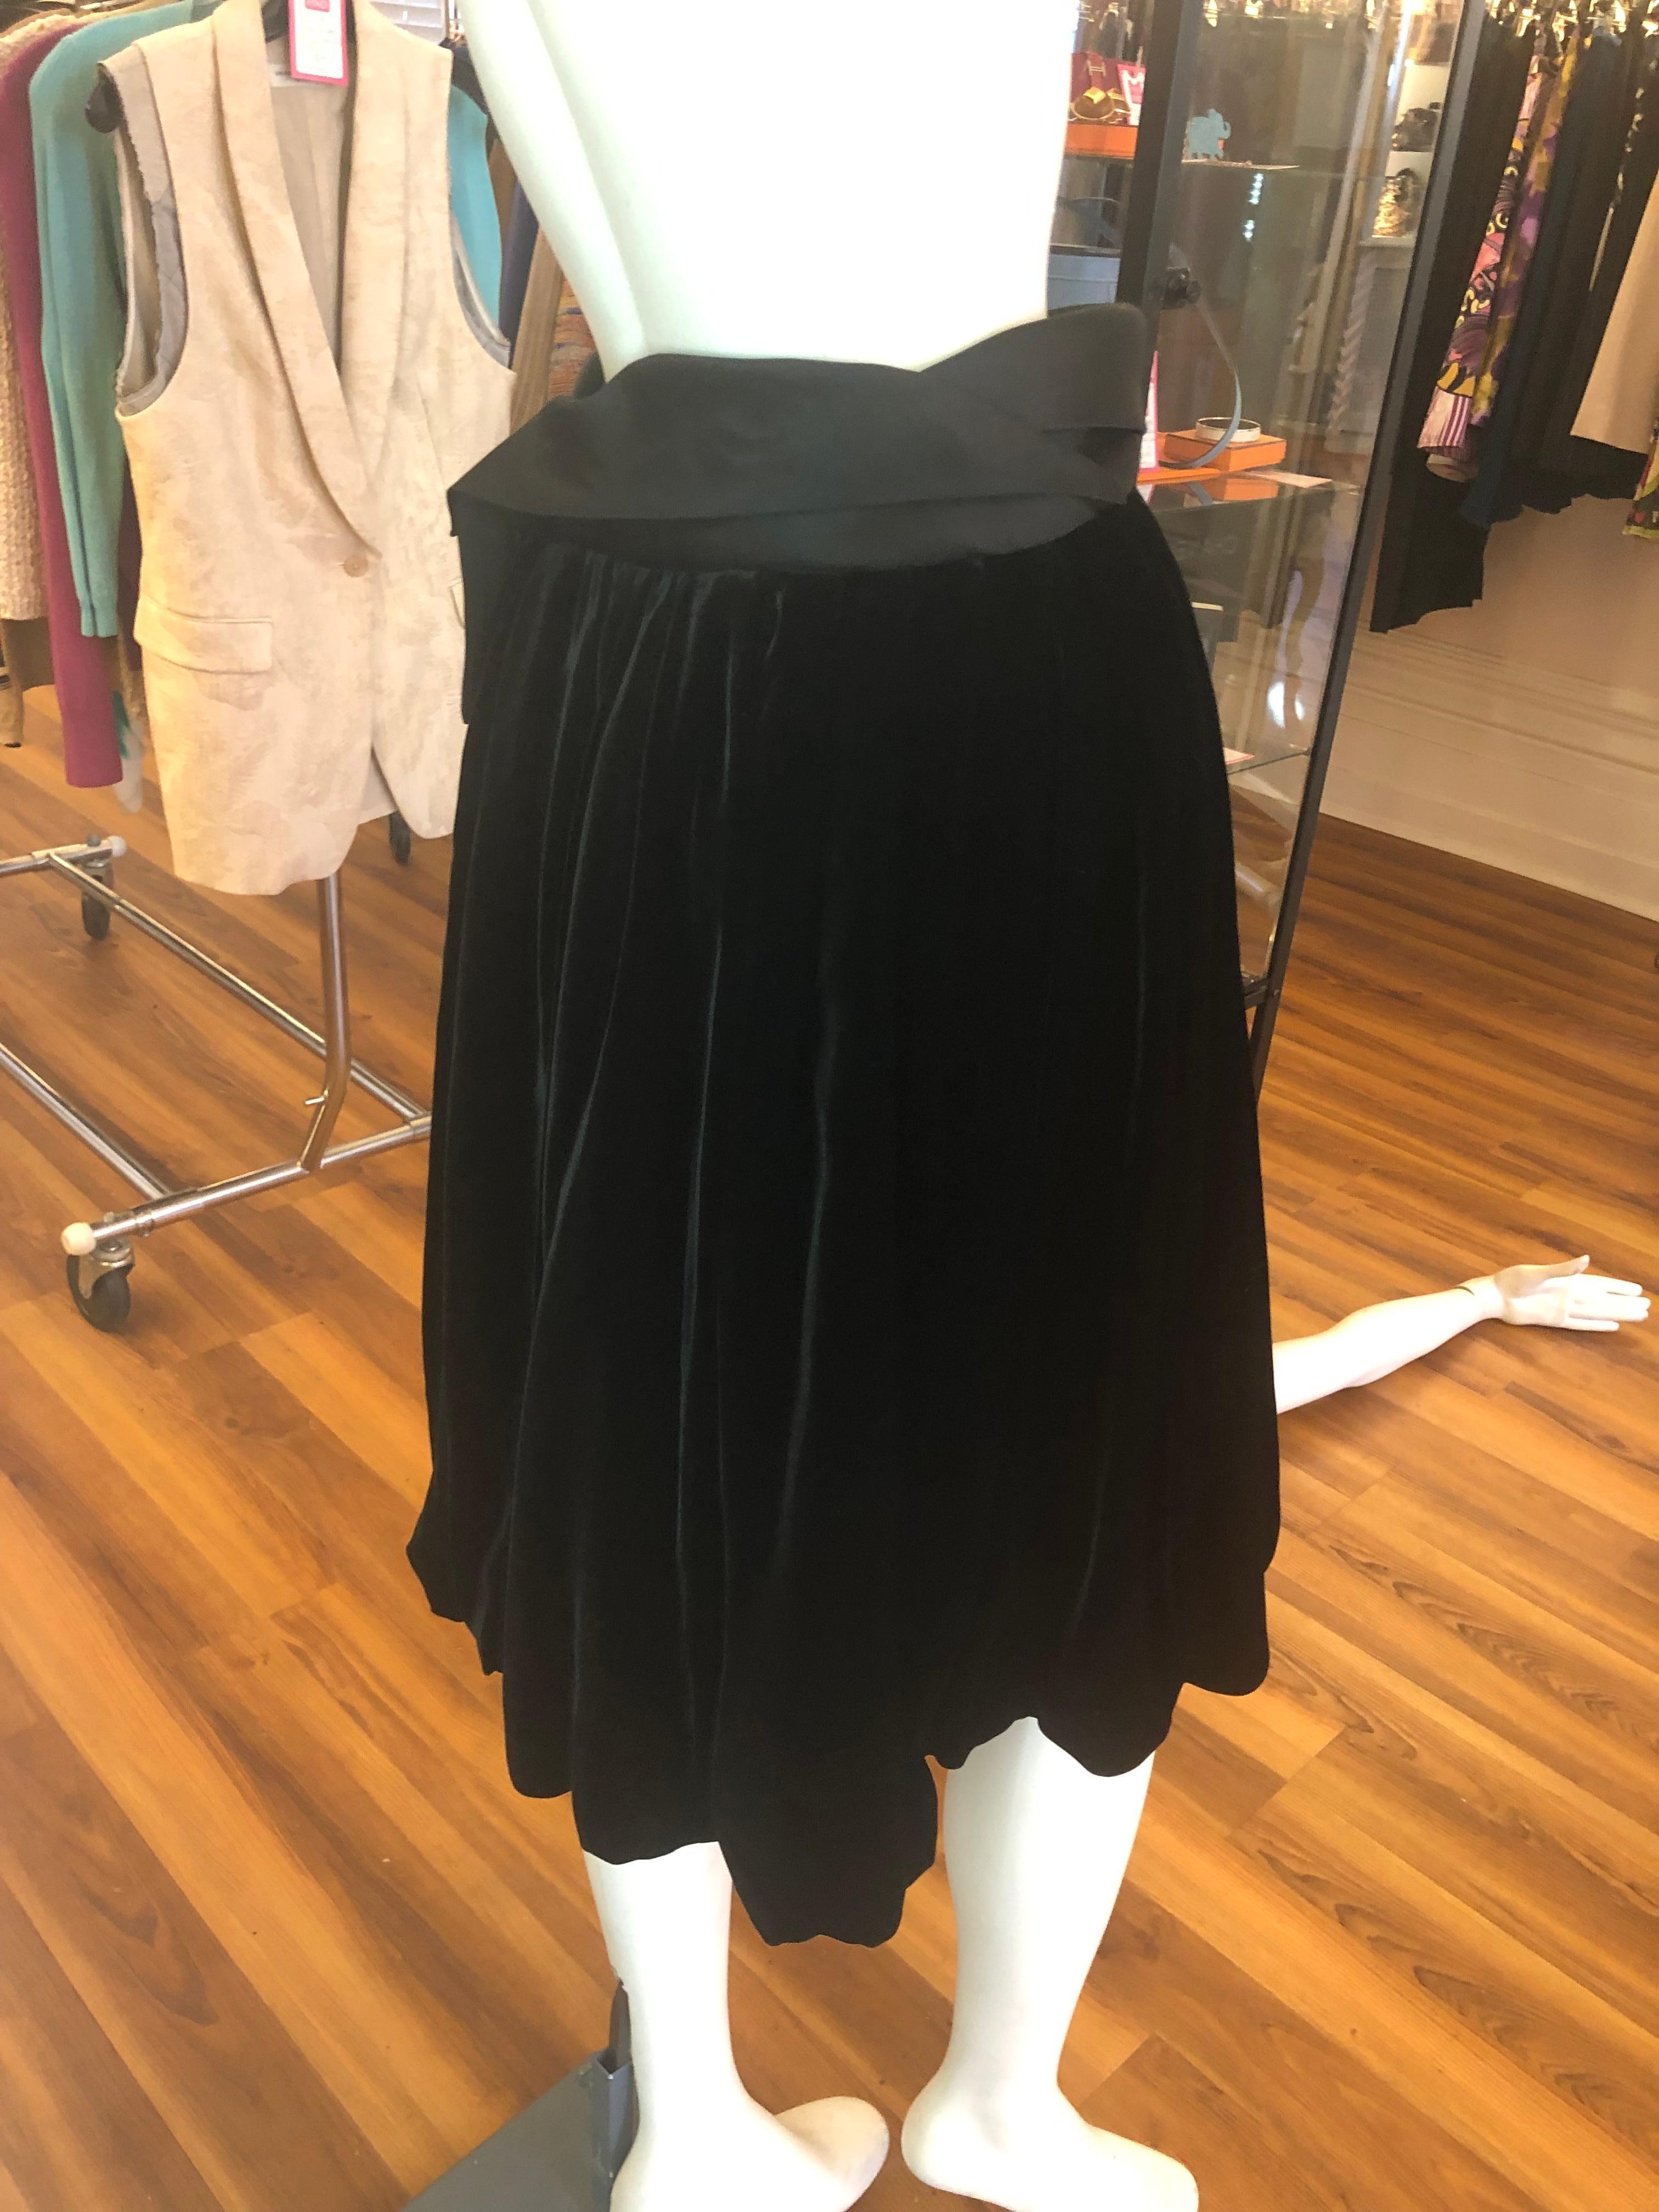 This is a lovely black velvet bubble skirt designed in the mid 2000s by John Galliano.
The velvet is complimented with a black satin band at the waist.